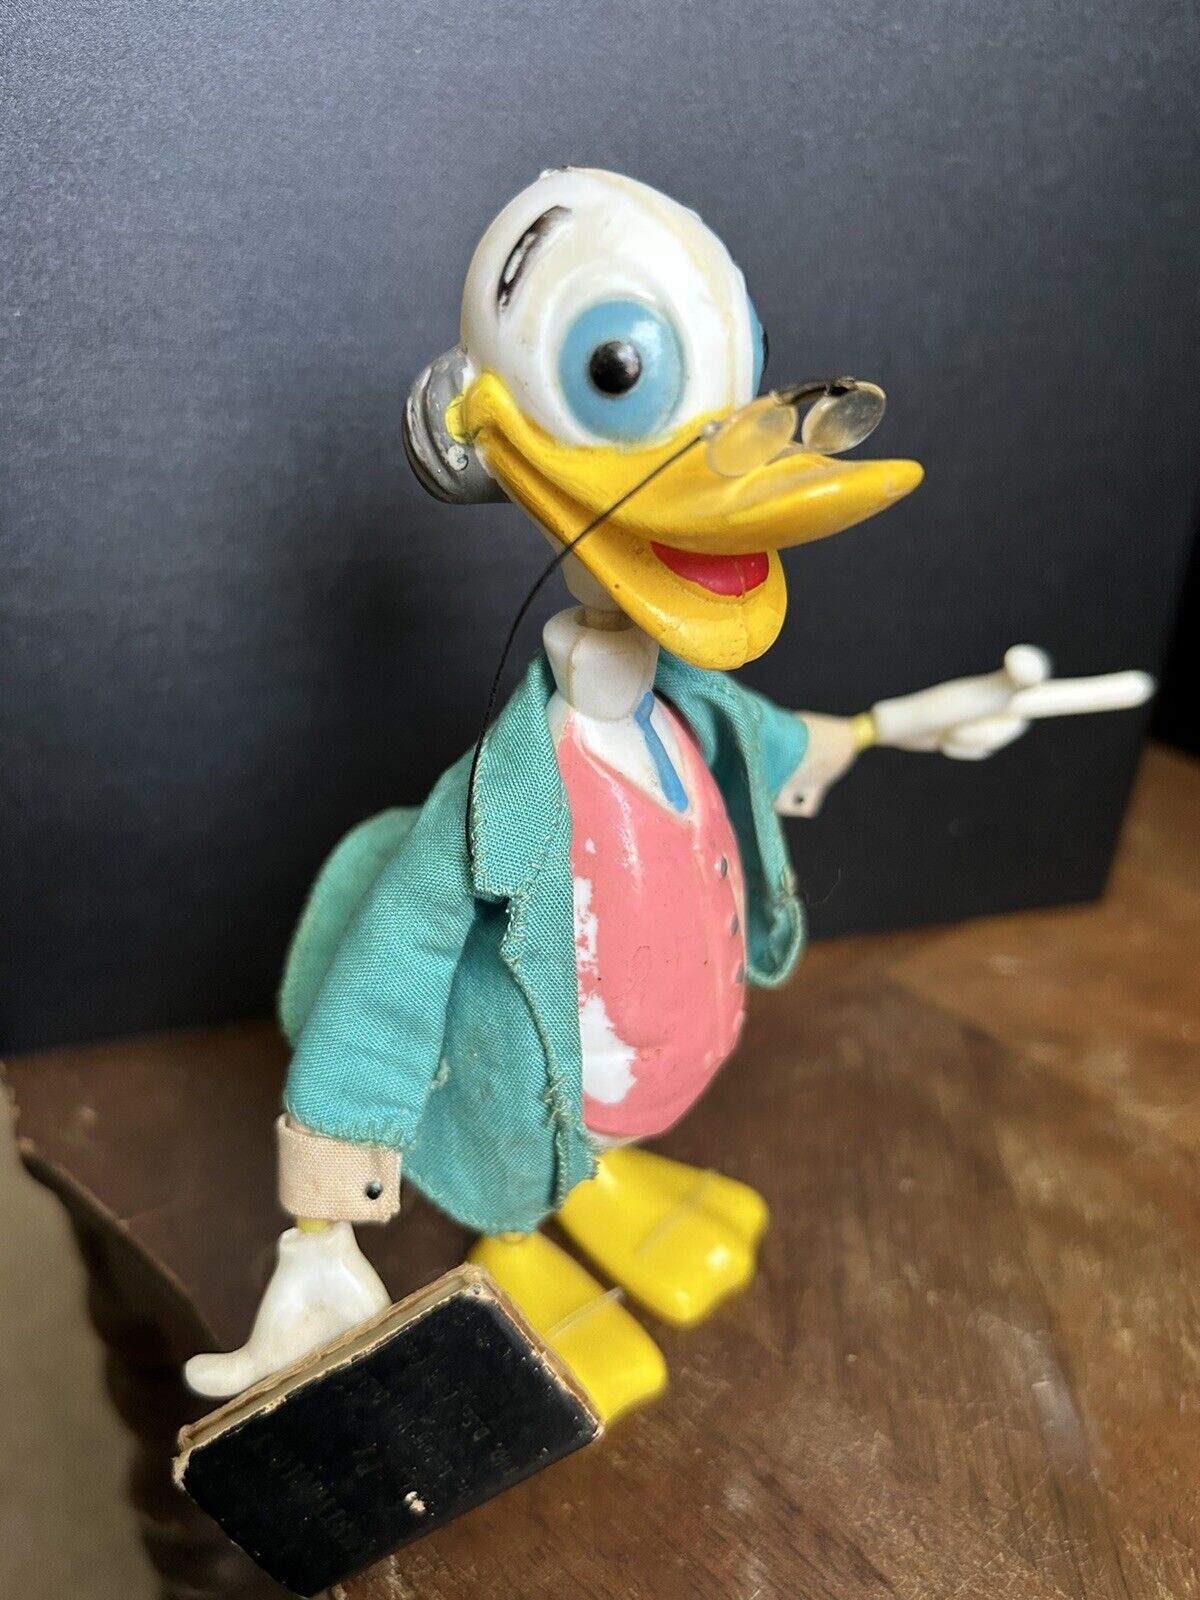 Vintage Walt Disney Ludwig Von Drake with Book And Glasses Very Rare